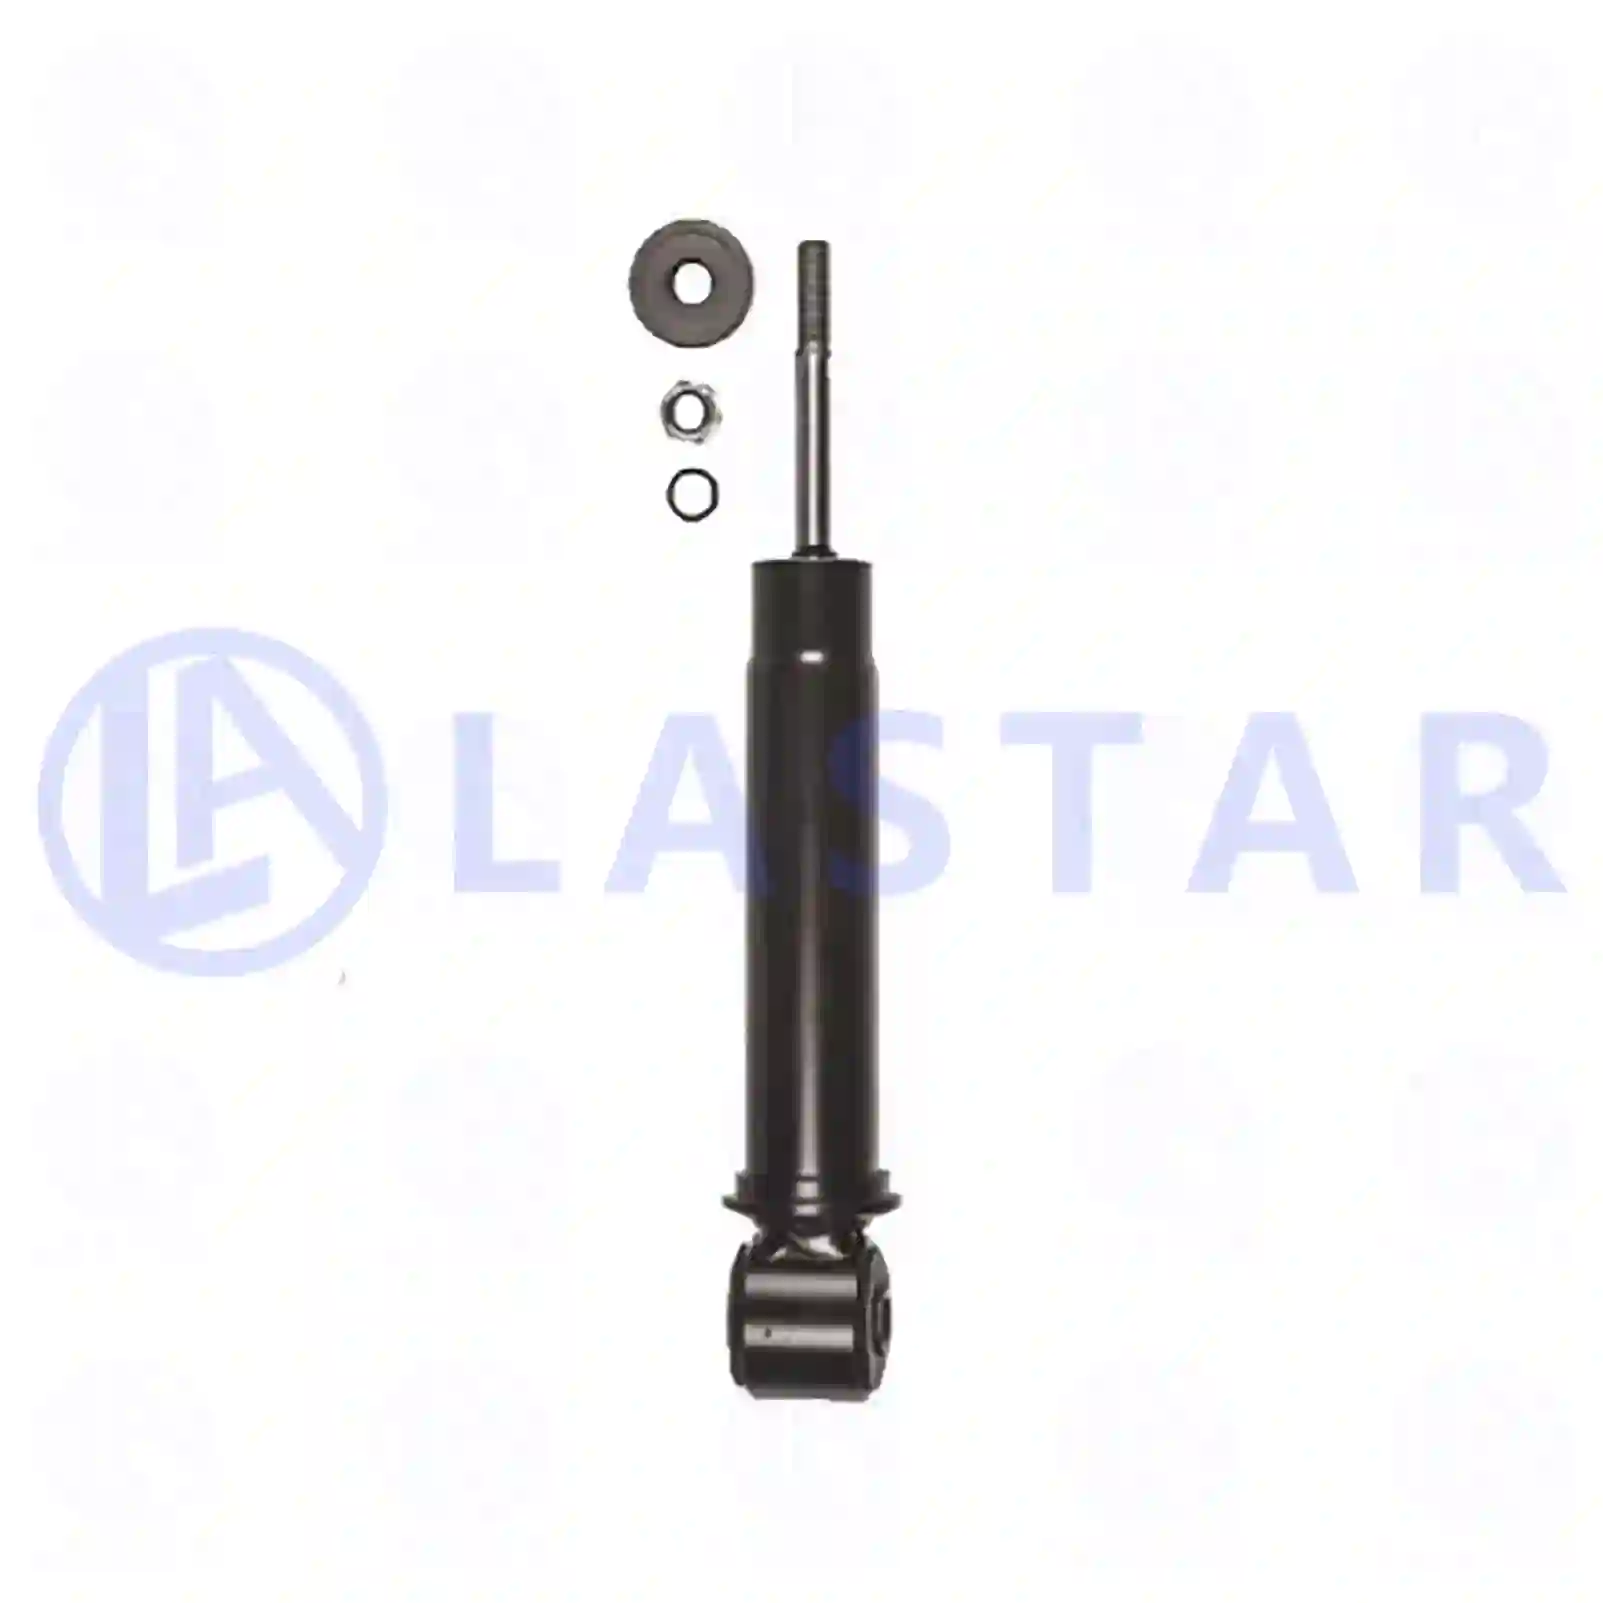 Cabin shock absorber, 77736045, 1871658, , , , , ||  77736045 Lastar Spare Part | Truck Spare Parts, Auotomotive Spare Parts Cabin shock absorber, 77736045, 1871658, , , , , ||  77736045 Lastar Spare Part | Truck Spare Parts, Auotomotive Spare Parts